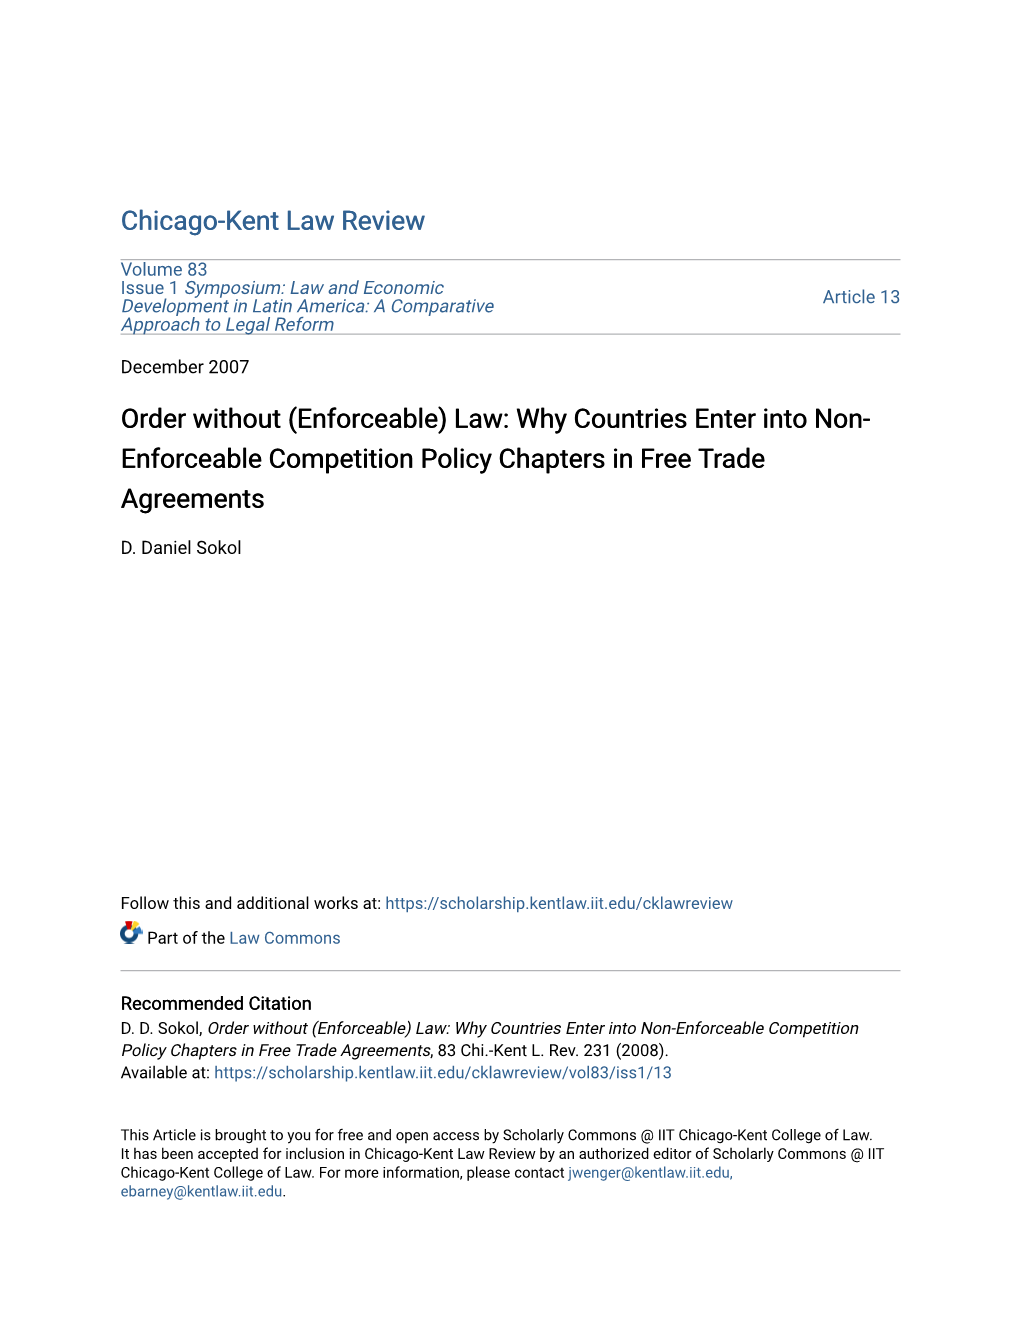 Order Without (Enforceable) Law: Why Countries Enter Into Non- Enforceable Competition Policy Chapters in Free Trade Agreements